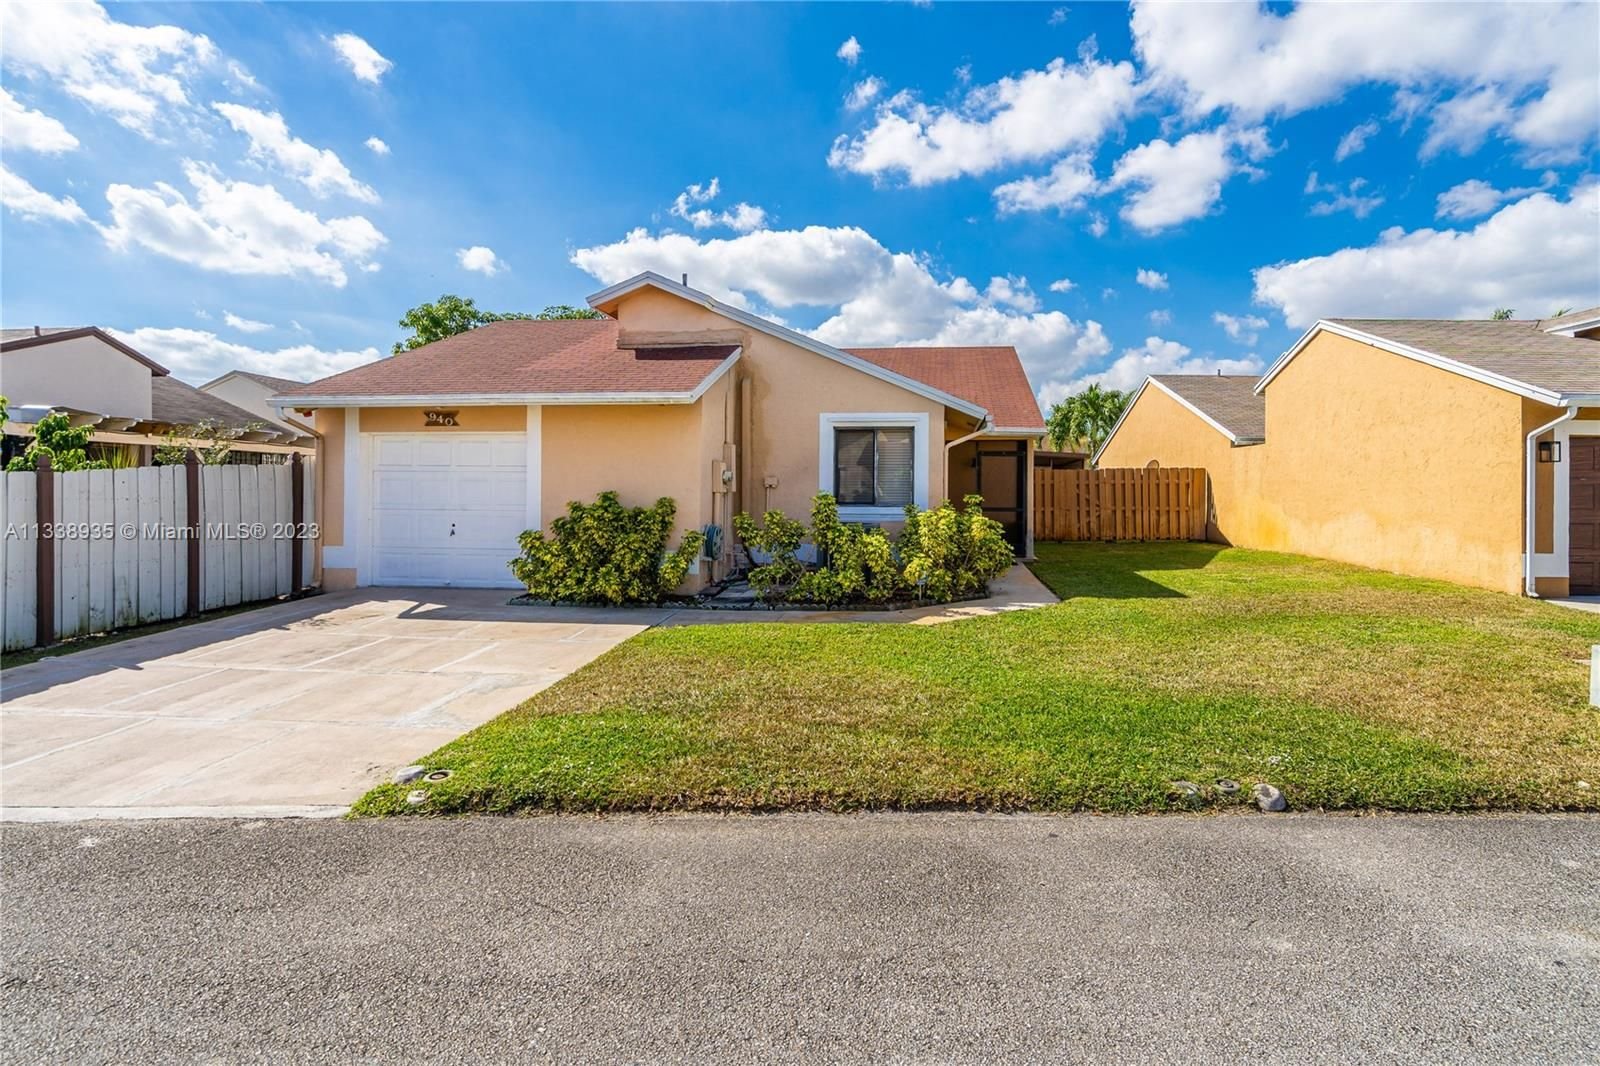 Real estate property located at 940 109th Ave, Broward County, Pembroke Pines, FL